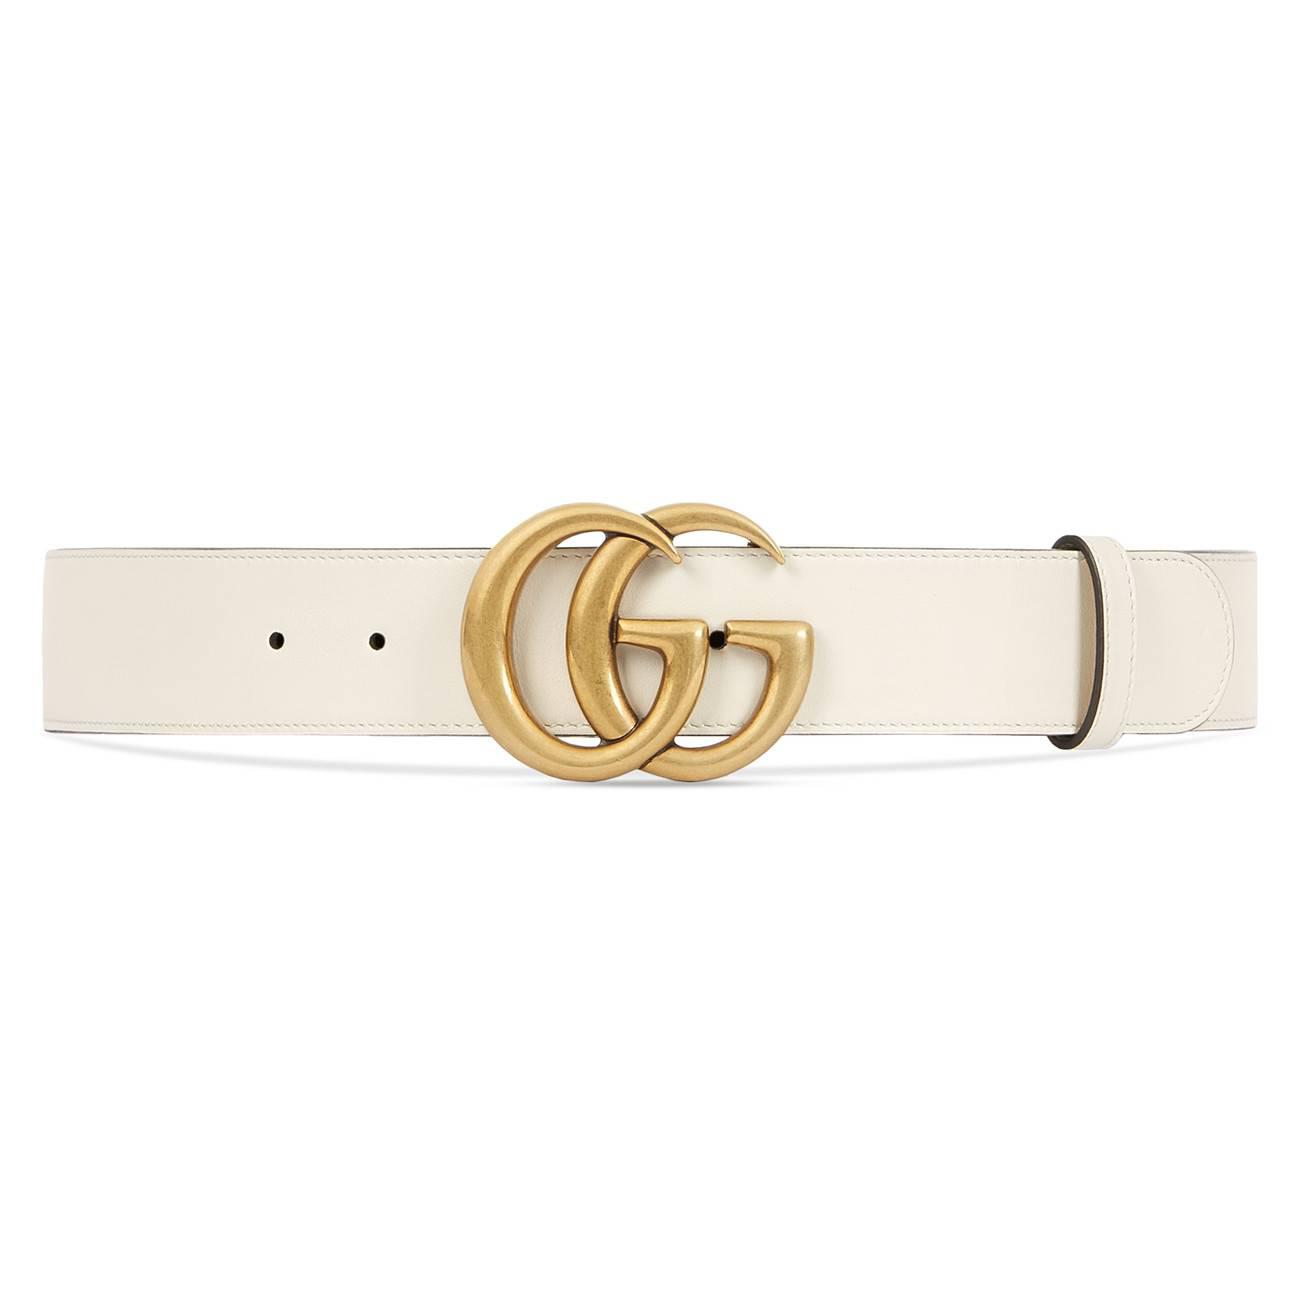 Gucci White Leather Belt With Double G Buckle - Save 24% - Lyst